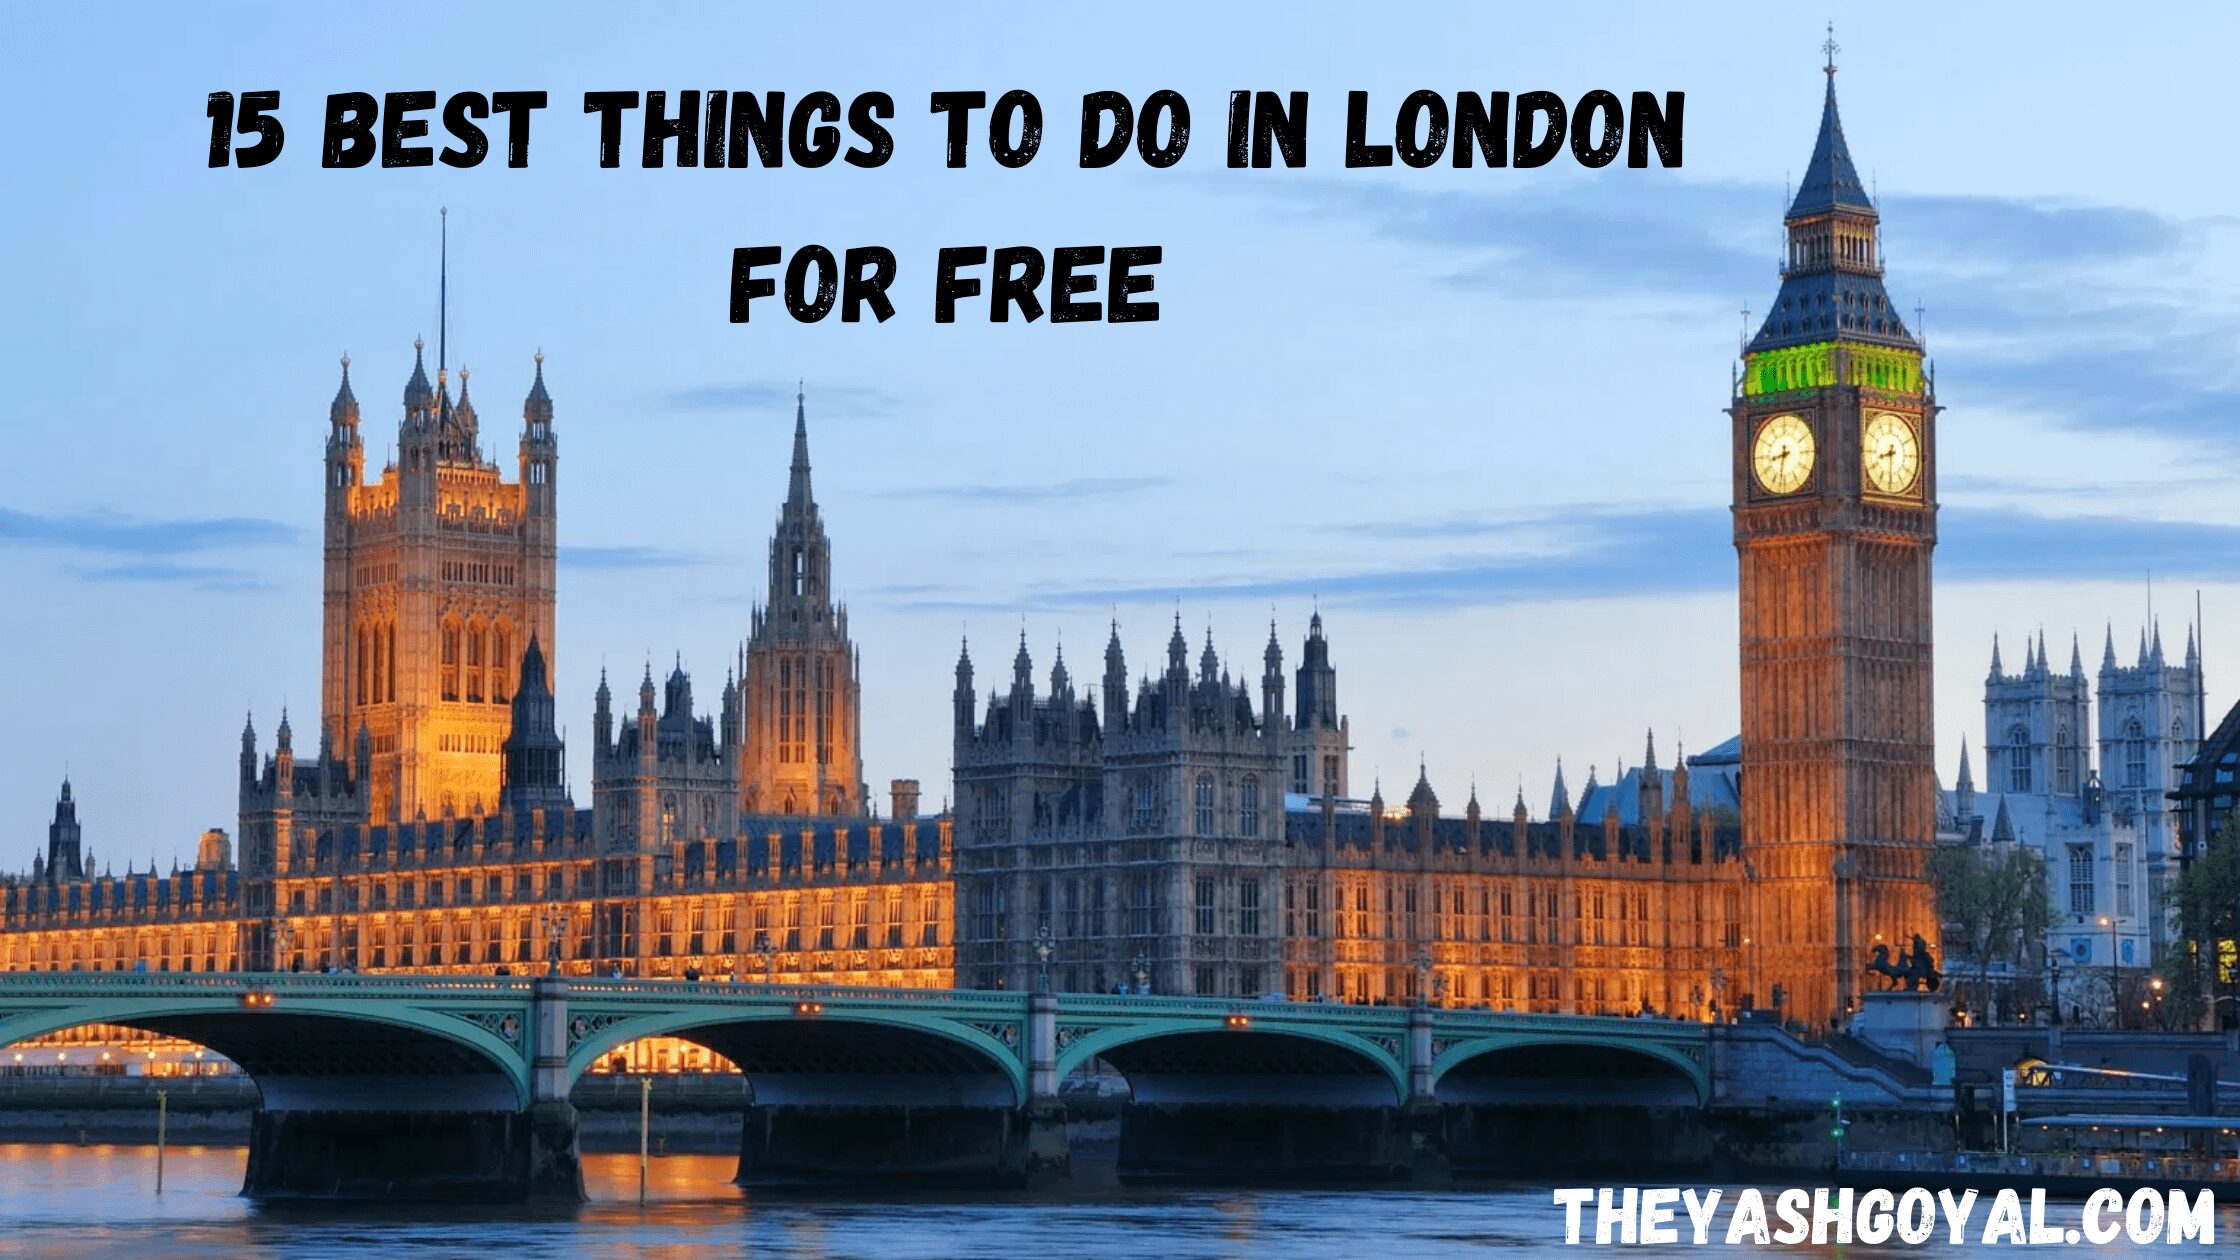 15 Best Things To Do In London For Free